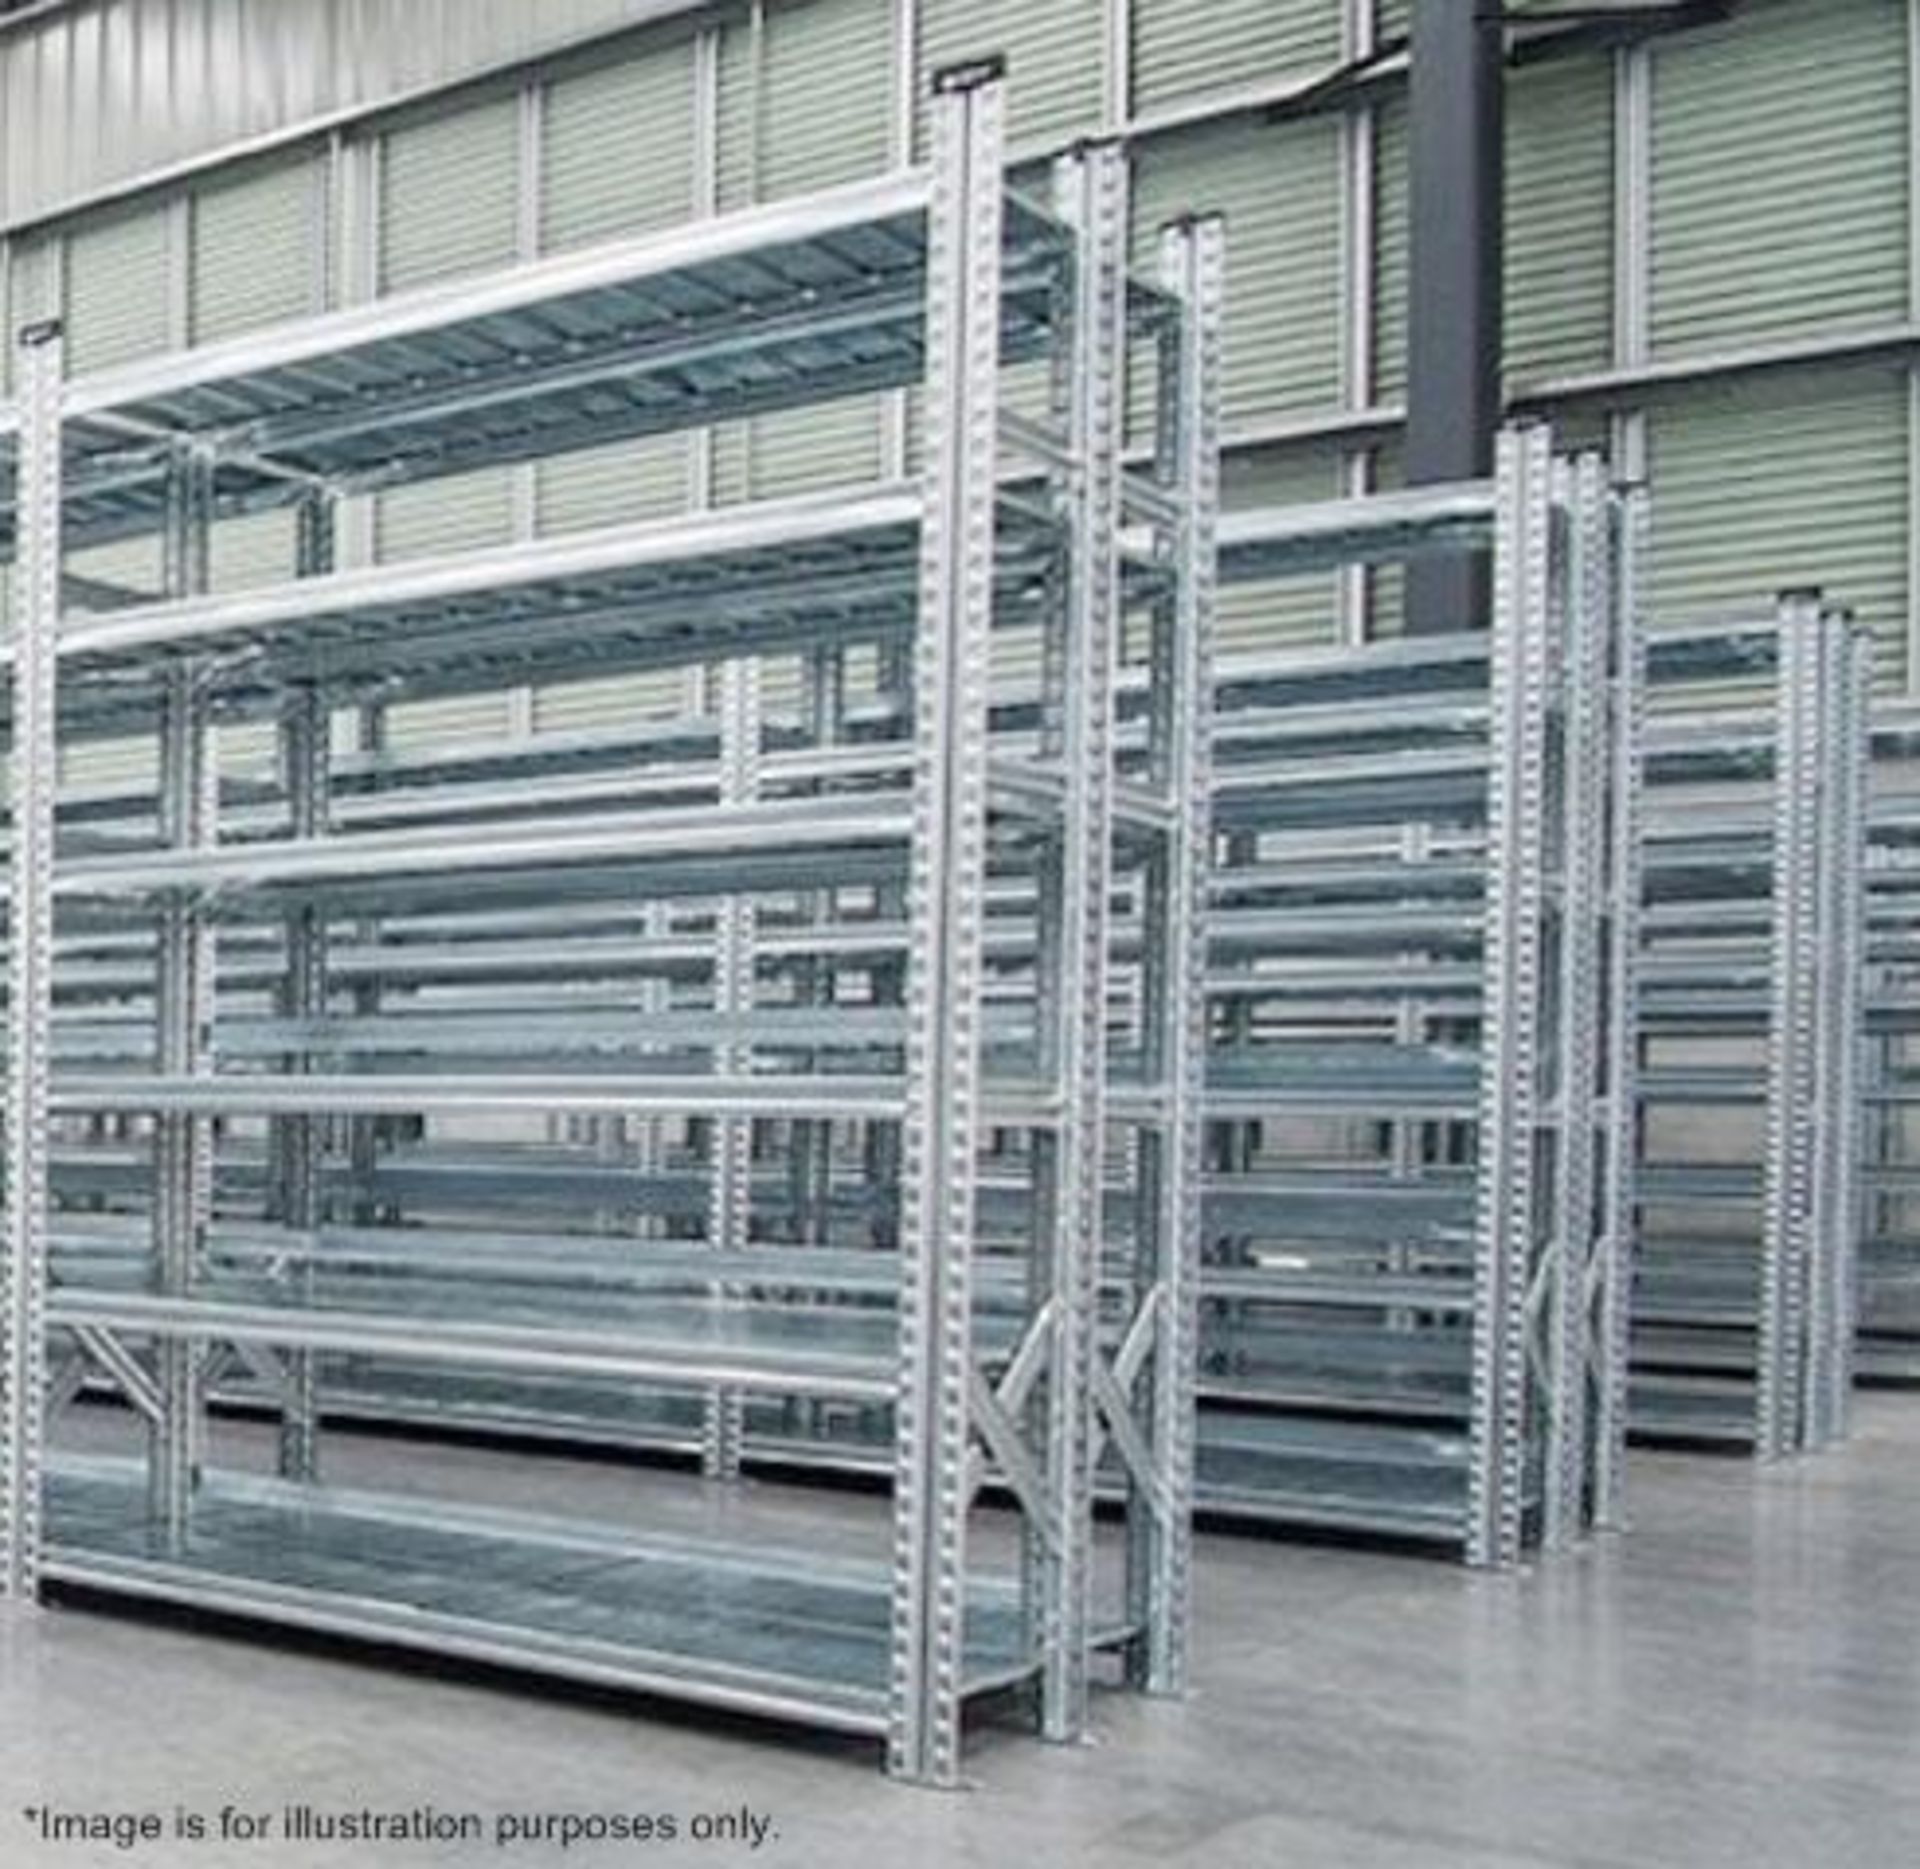 4 x Bays of Metalsistem Steel Modular Storage Shelving - Includes 29 Pieces - Recently Removed - Image 4 of 17